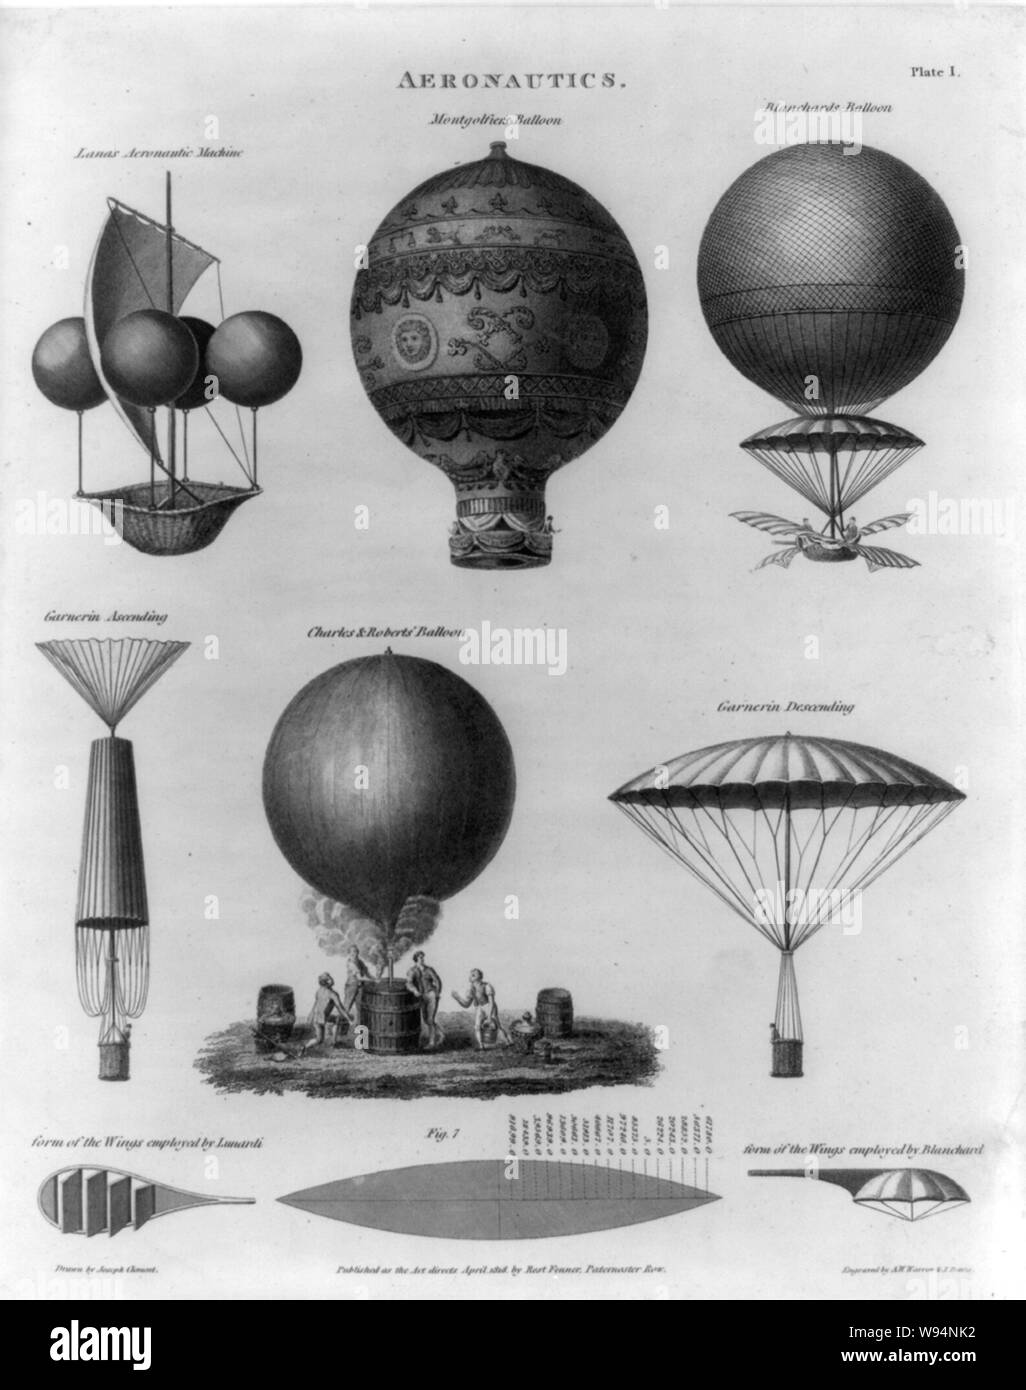 Aeronautics Technical illustration shows early balloon designs: Lana's aeronautic machine, Montgolfiers' balloon, Blanchard's balloon, Garnerin ascending and descending in his parachute, the Charles and Roberts' balloon being inflated, the form of the wings employed by Lunardi, and the form of the wings employed by Blanchard. Stock Photo